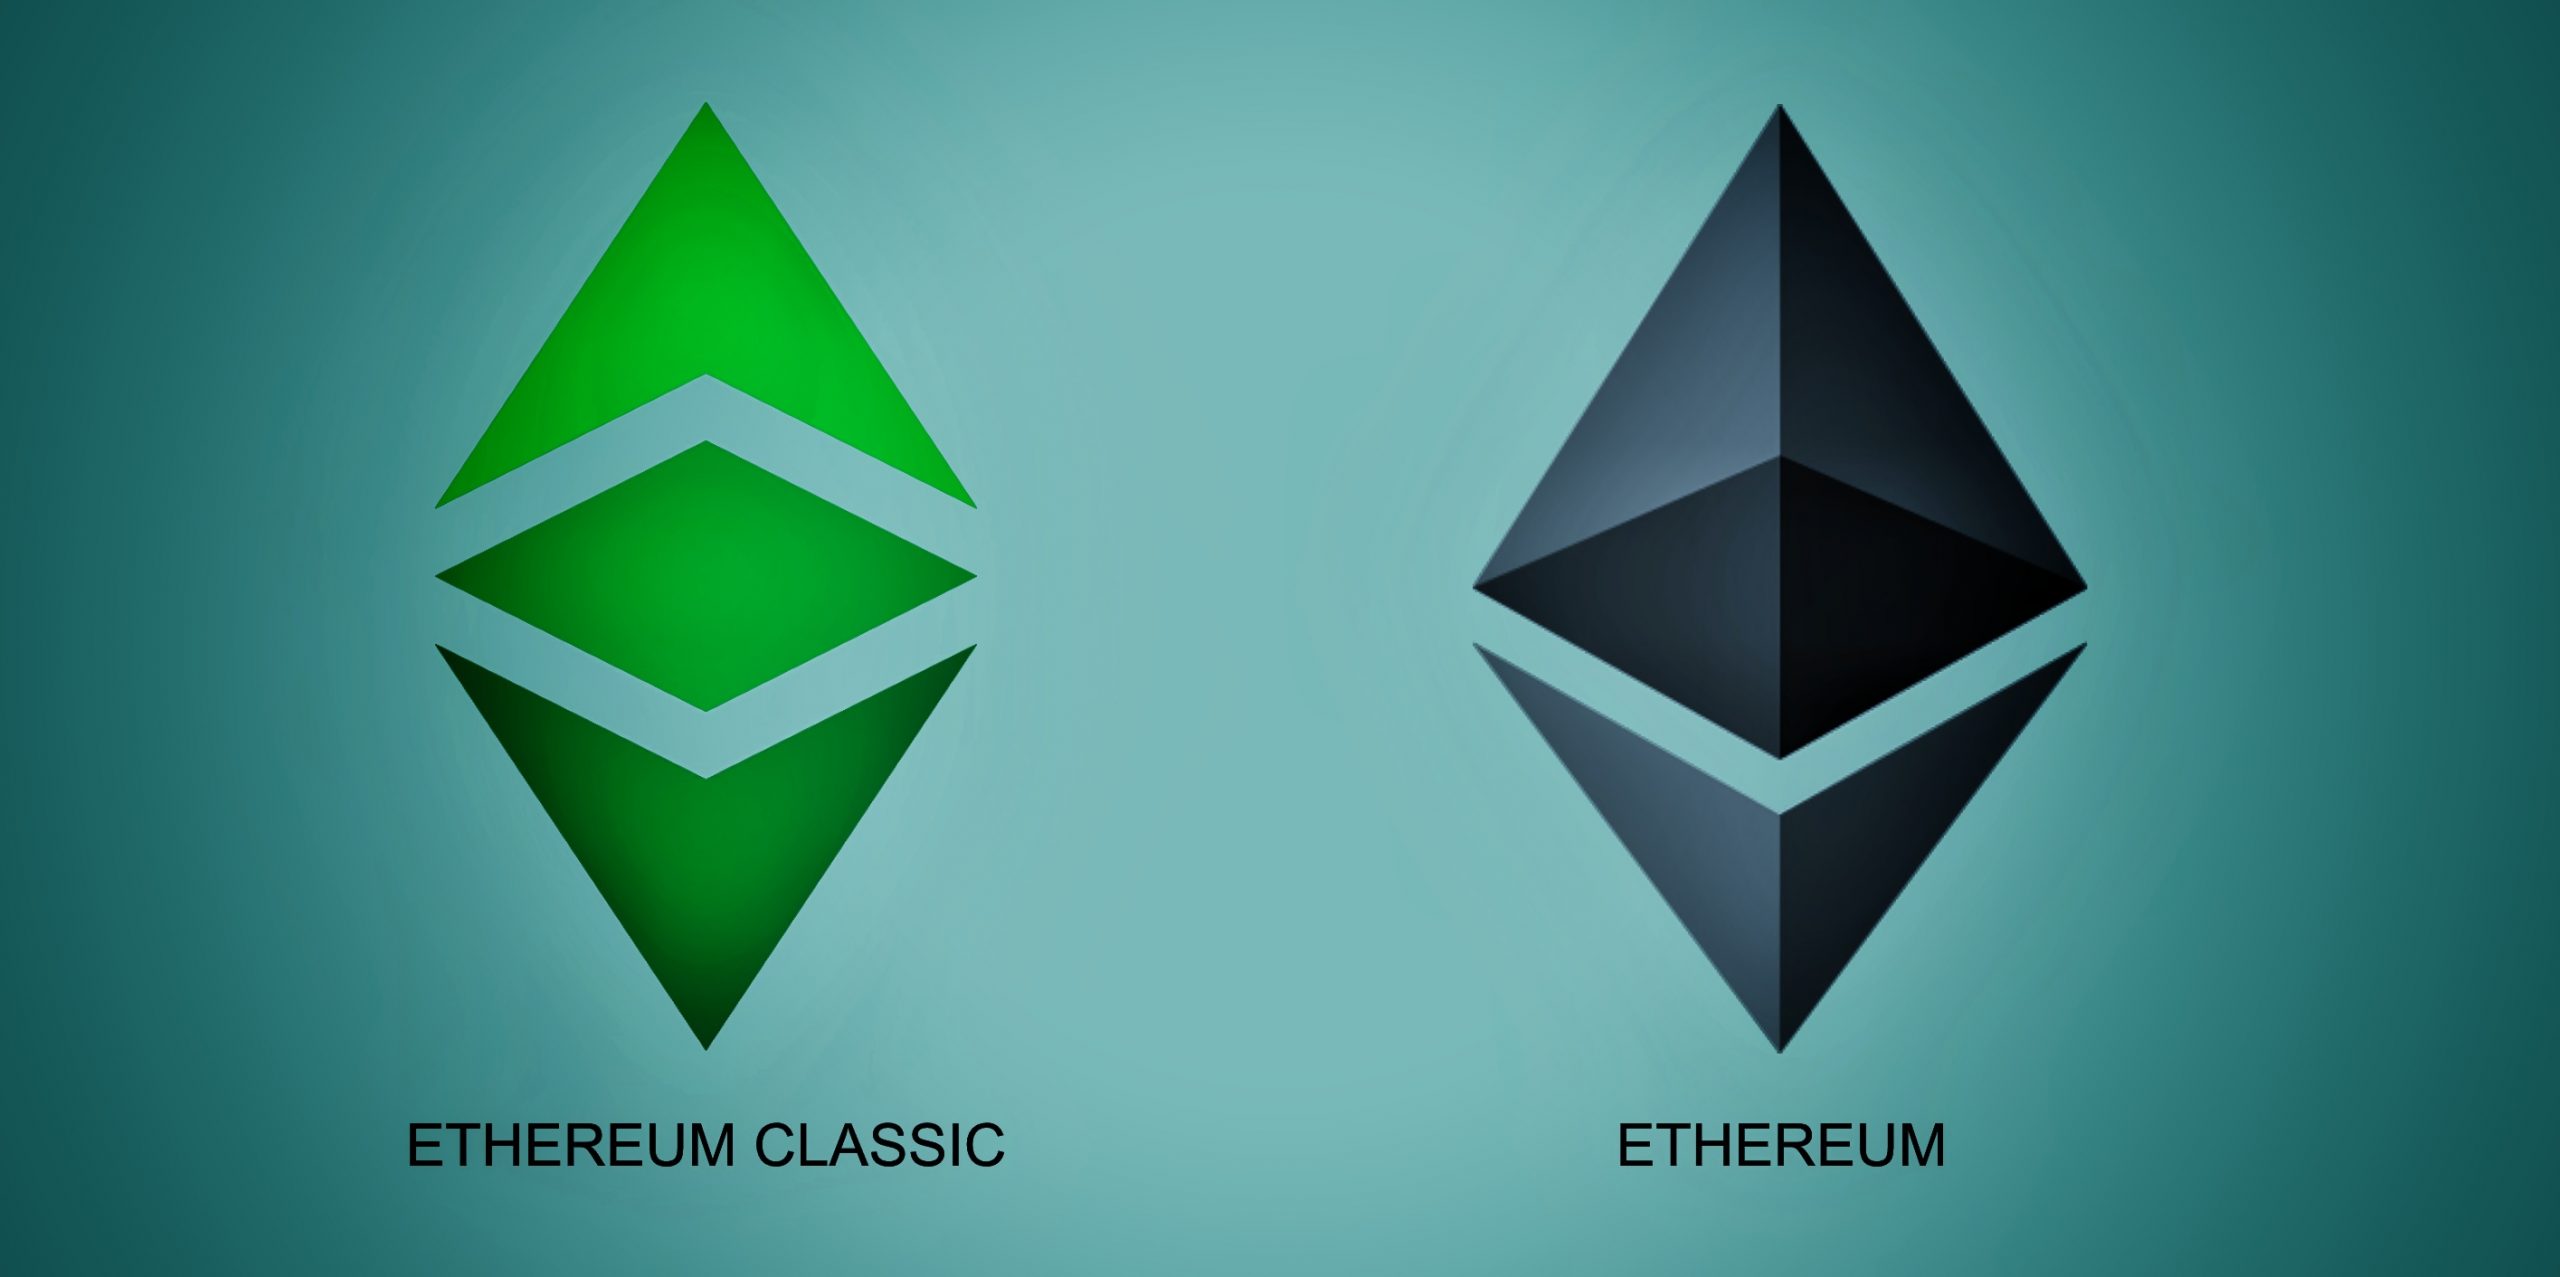 Ethereum vs. Ethereum Classic - What's the Difference? | OriginStamp